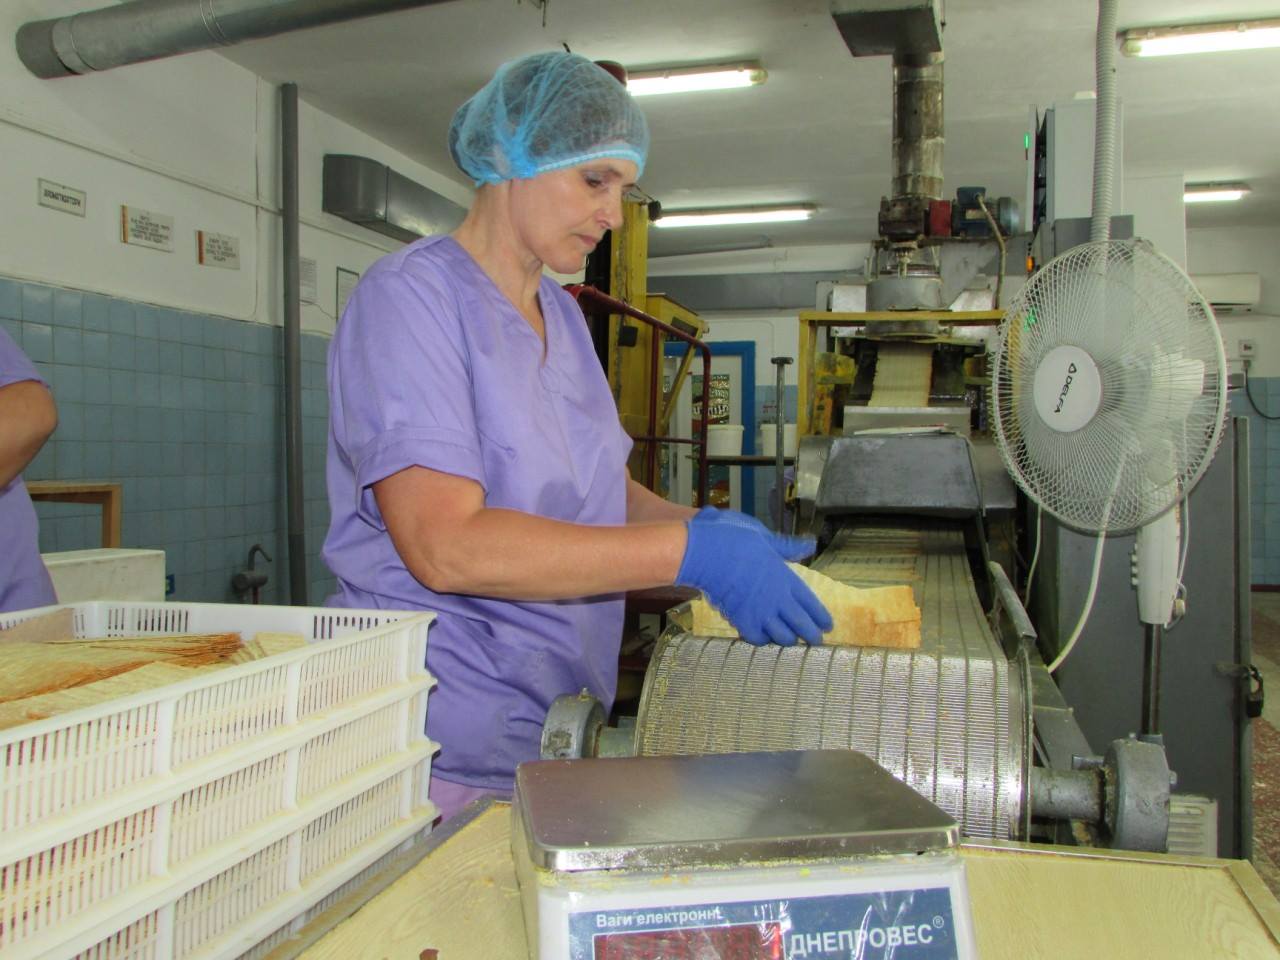 Production of wafer chips at the Shpola food factory